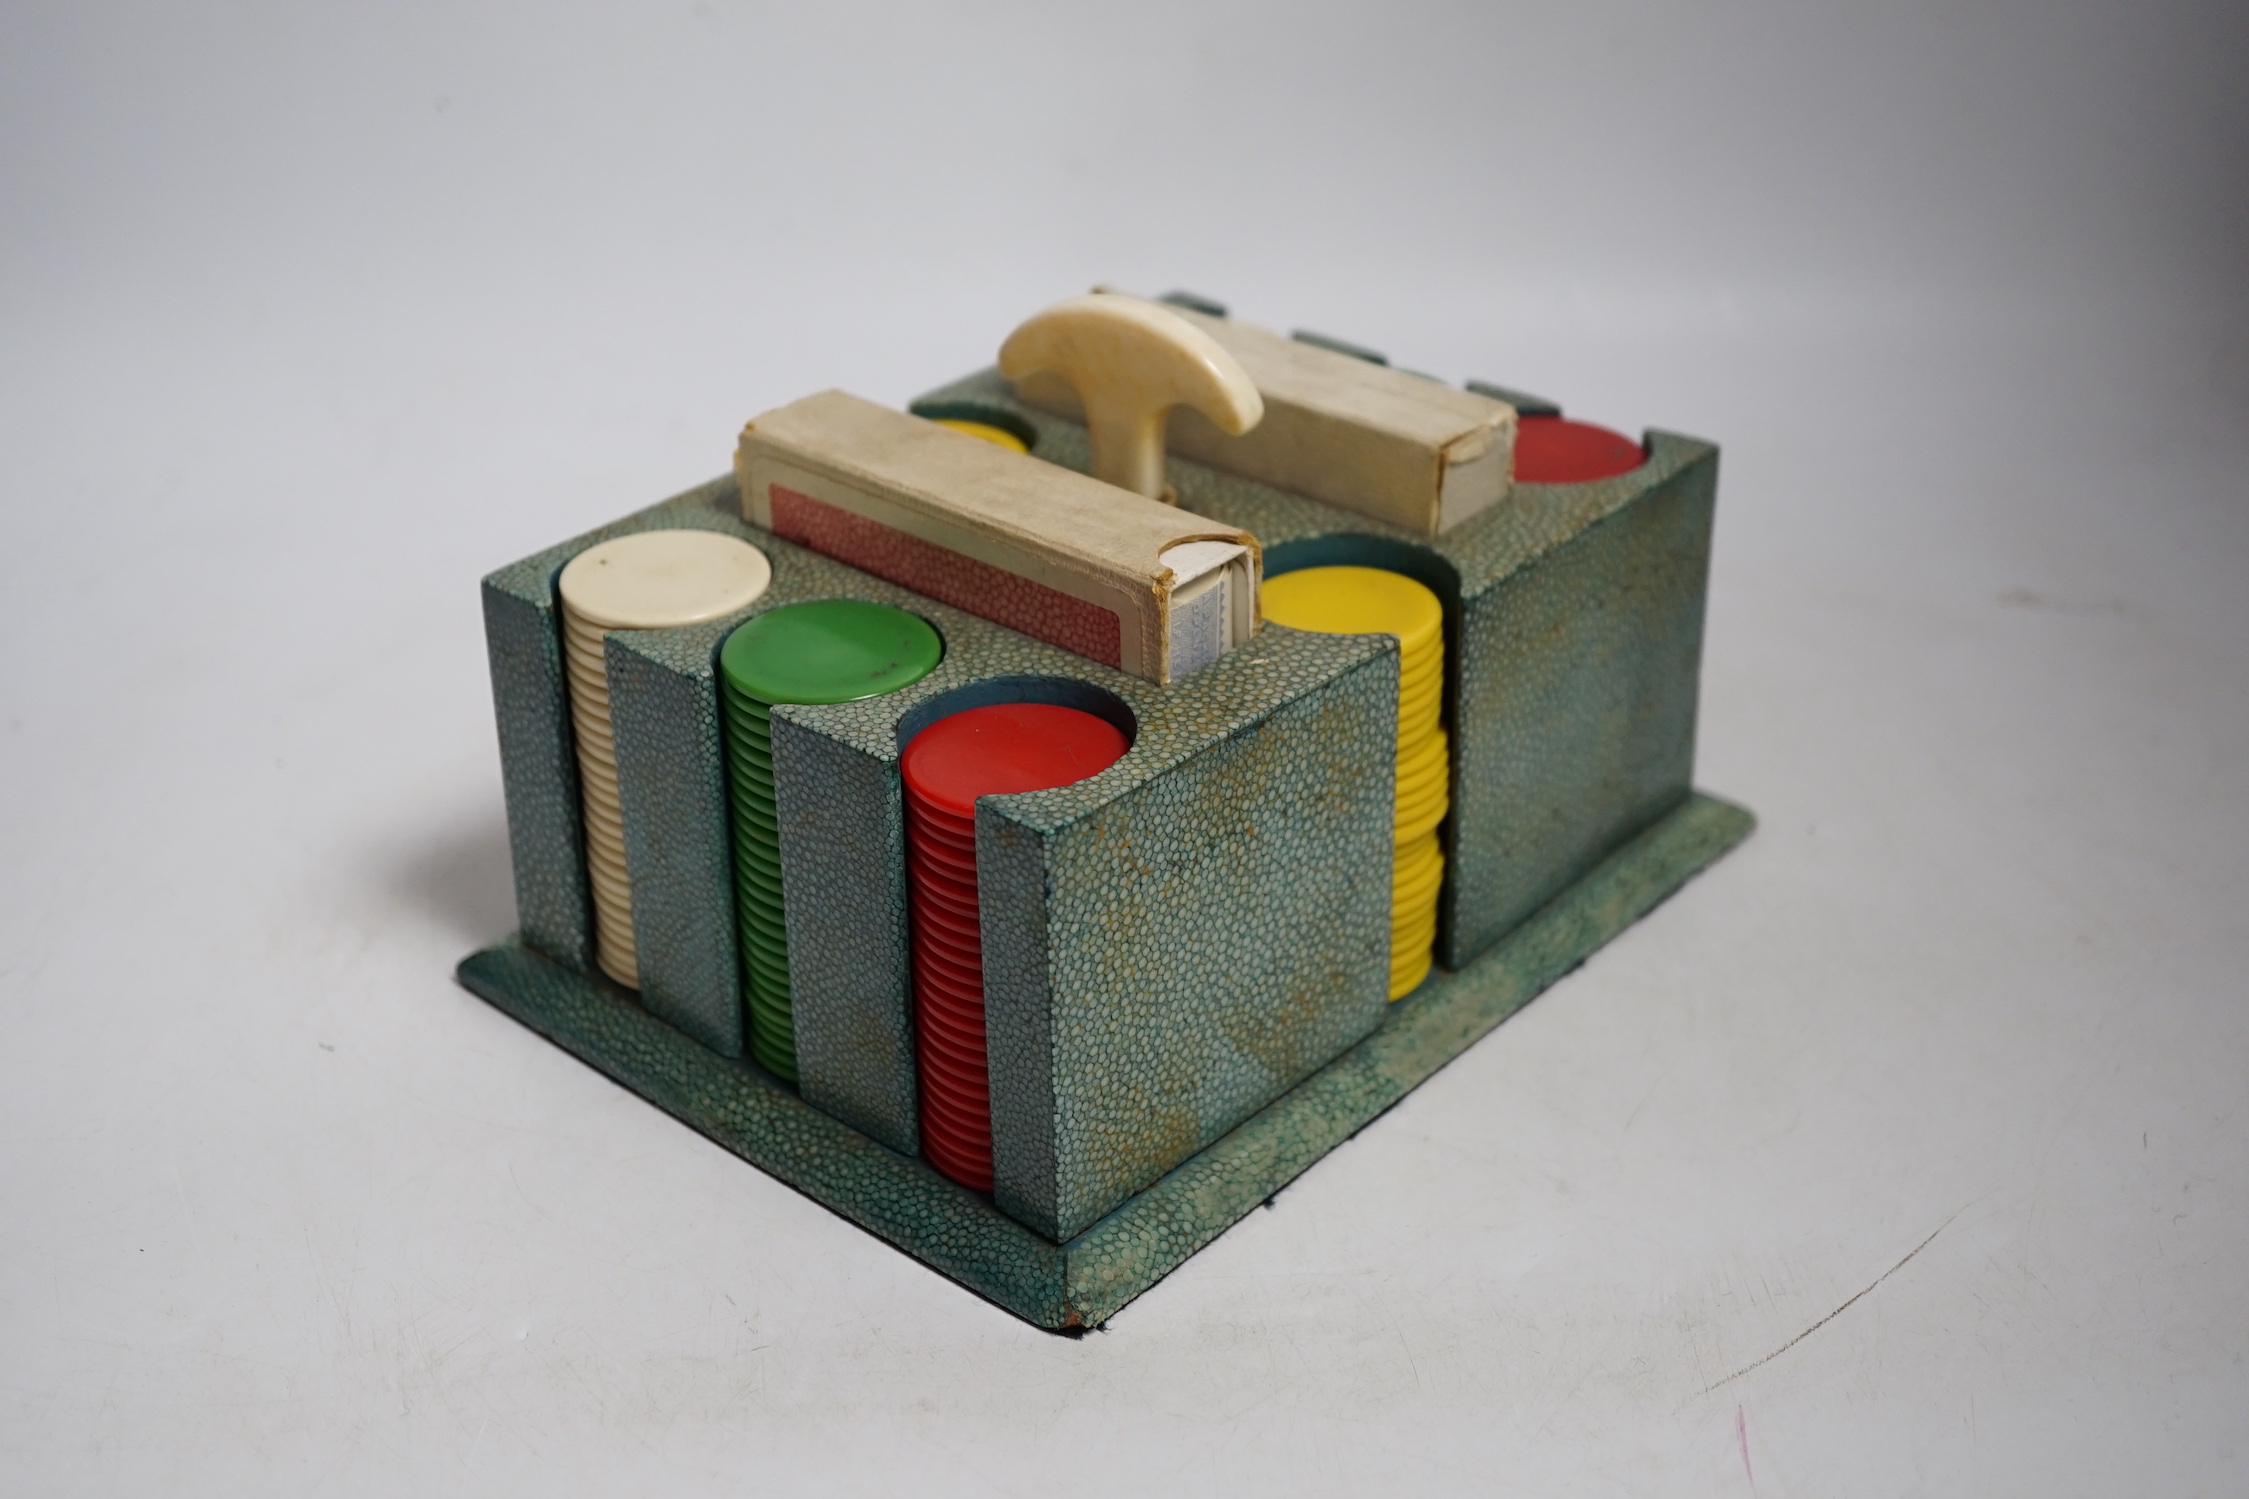 An Art Deco shagreen poker gaming set, ivory mounted with bakelite counters and two card packs by Goodall, London., CITES Submission reference 5SWXP1K4